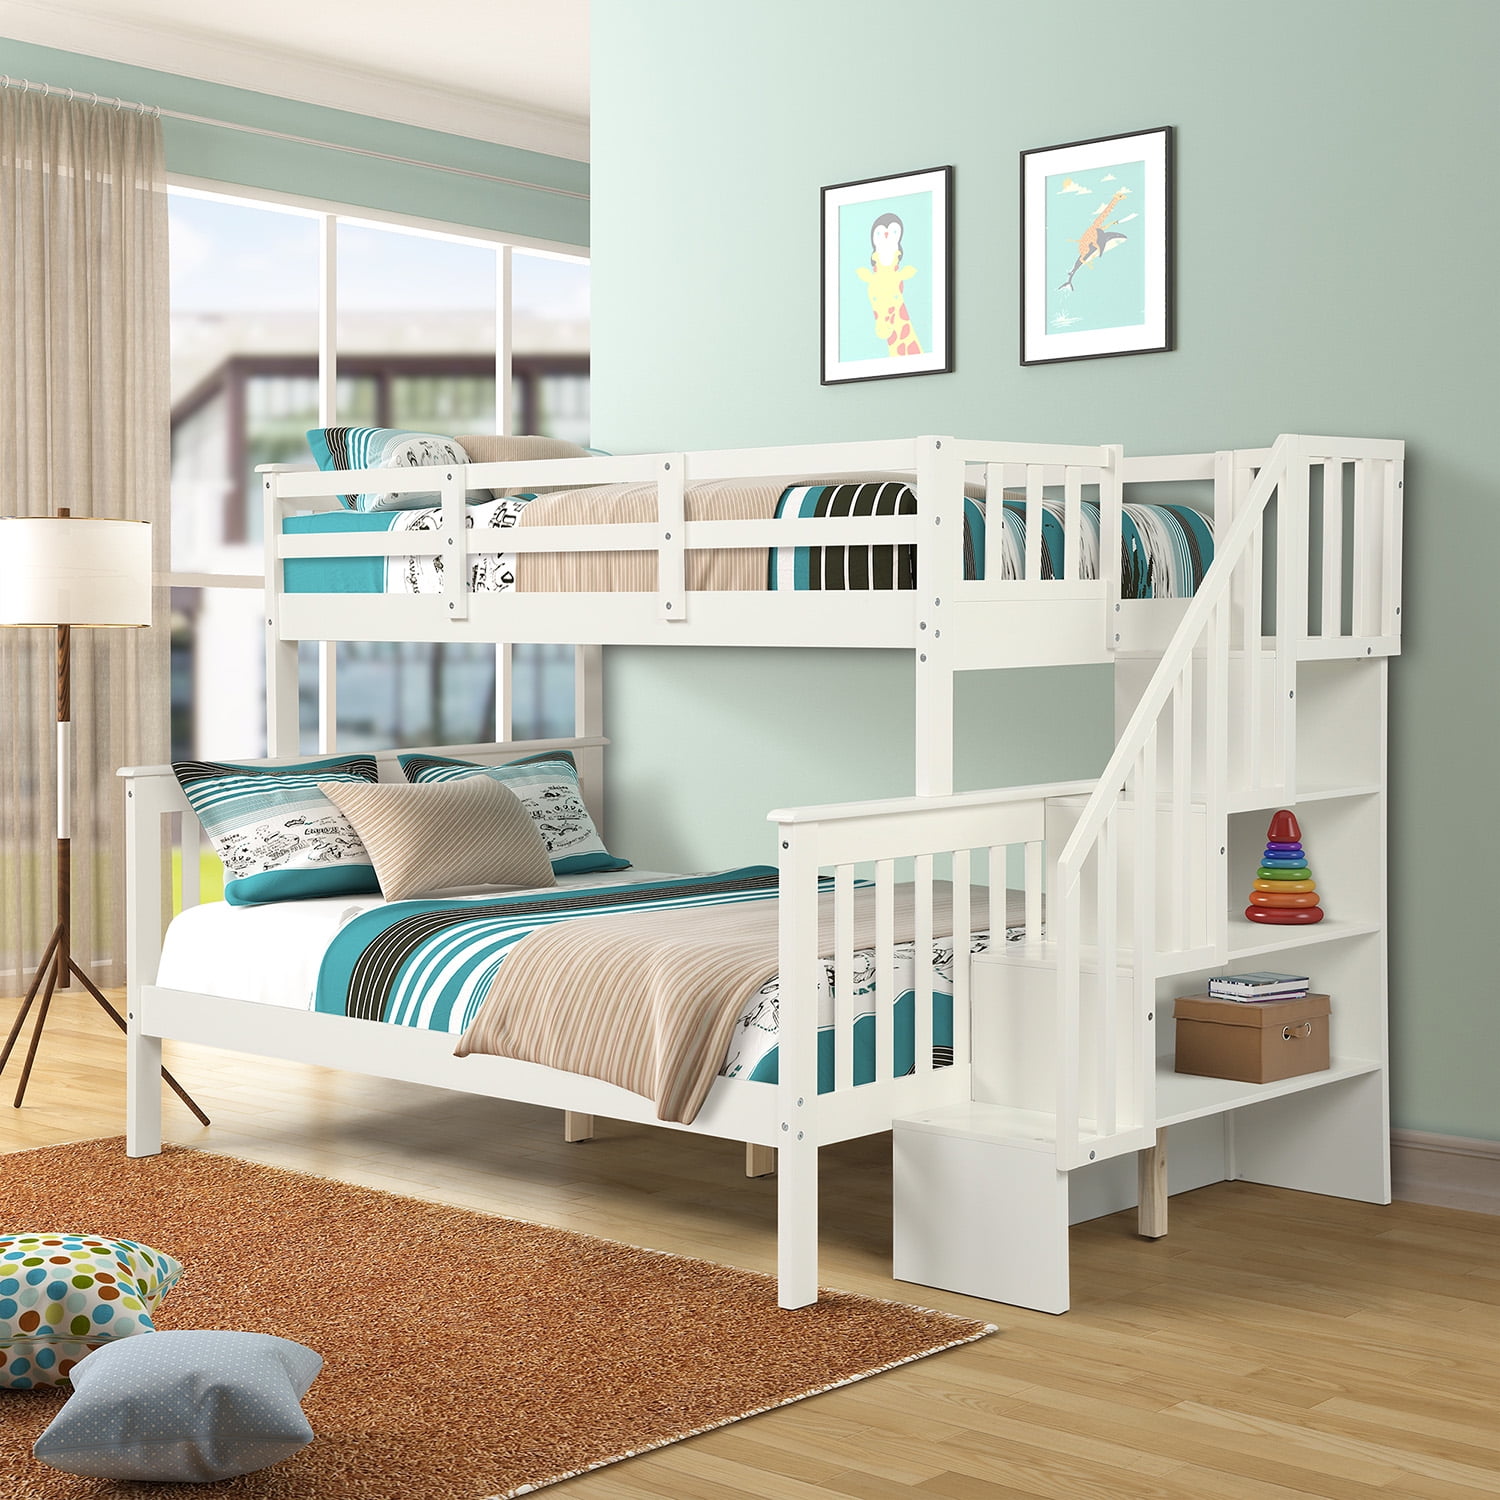 Stairway Bunk Beds Twin Over Full, Quality Bunk Beds With Storage